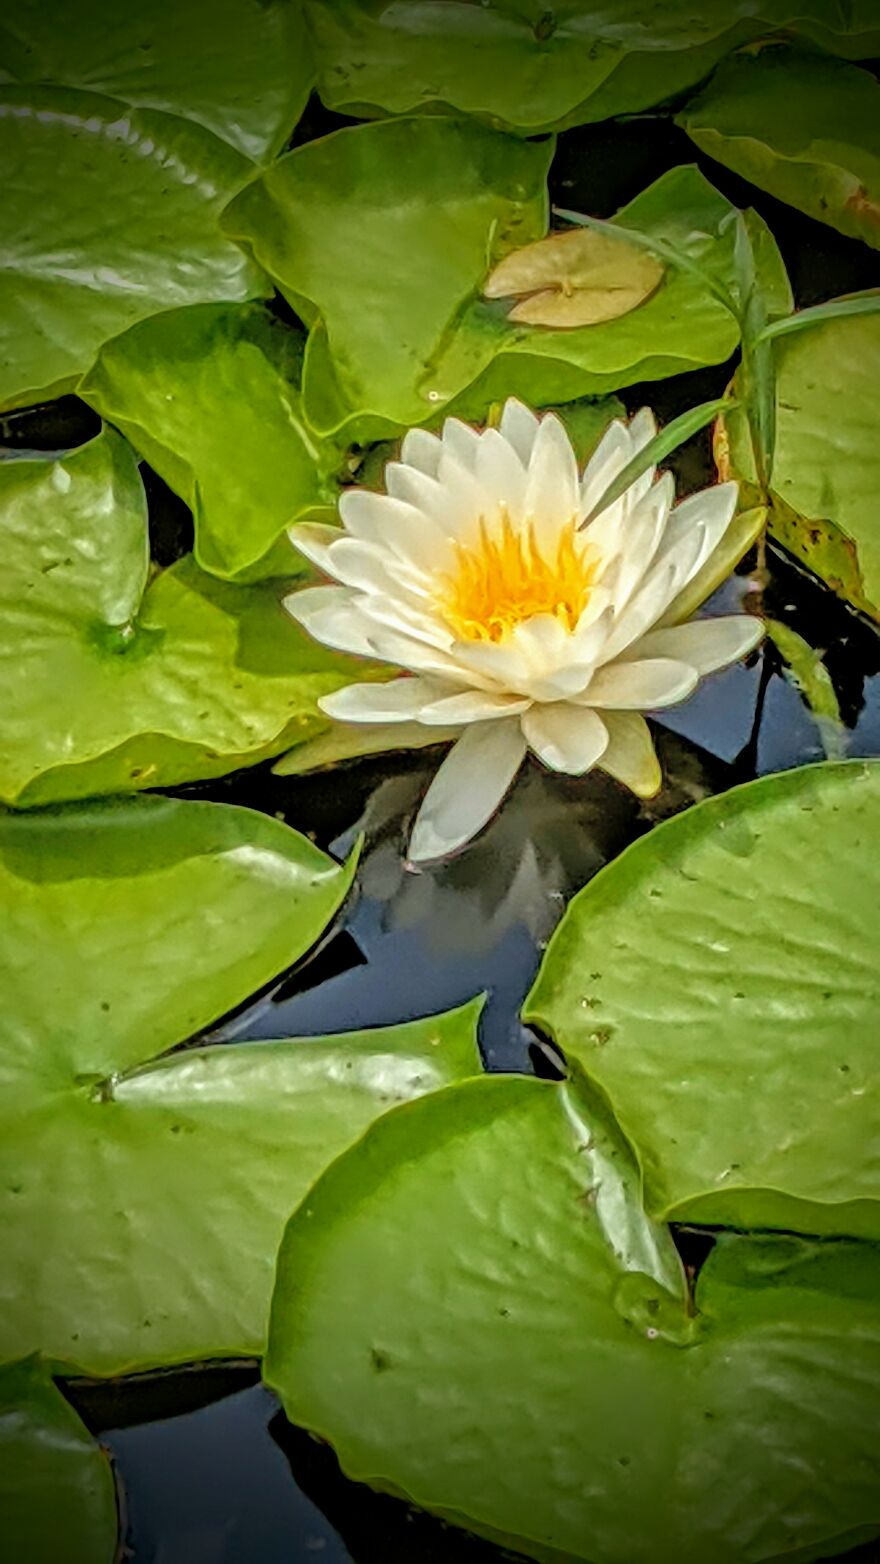 The Only Flower In The Pond